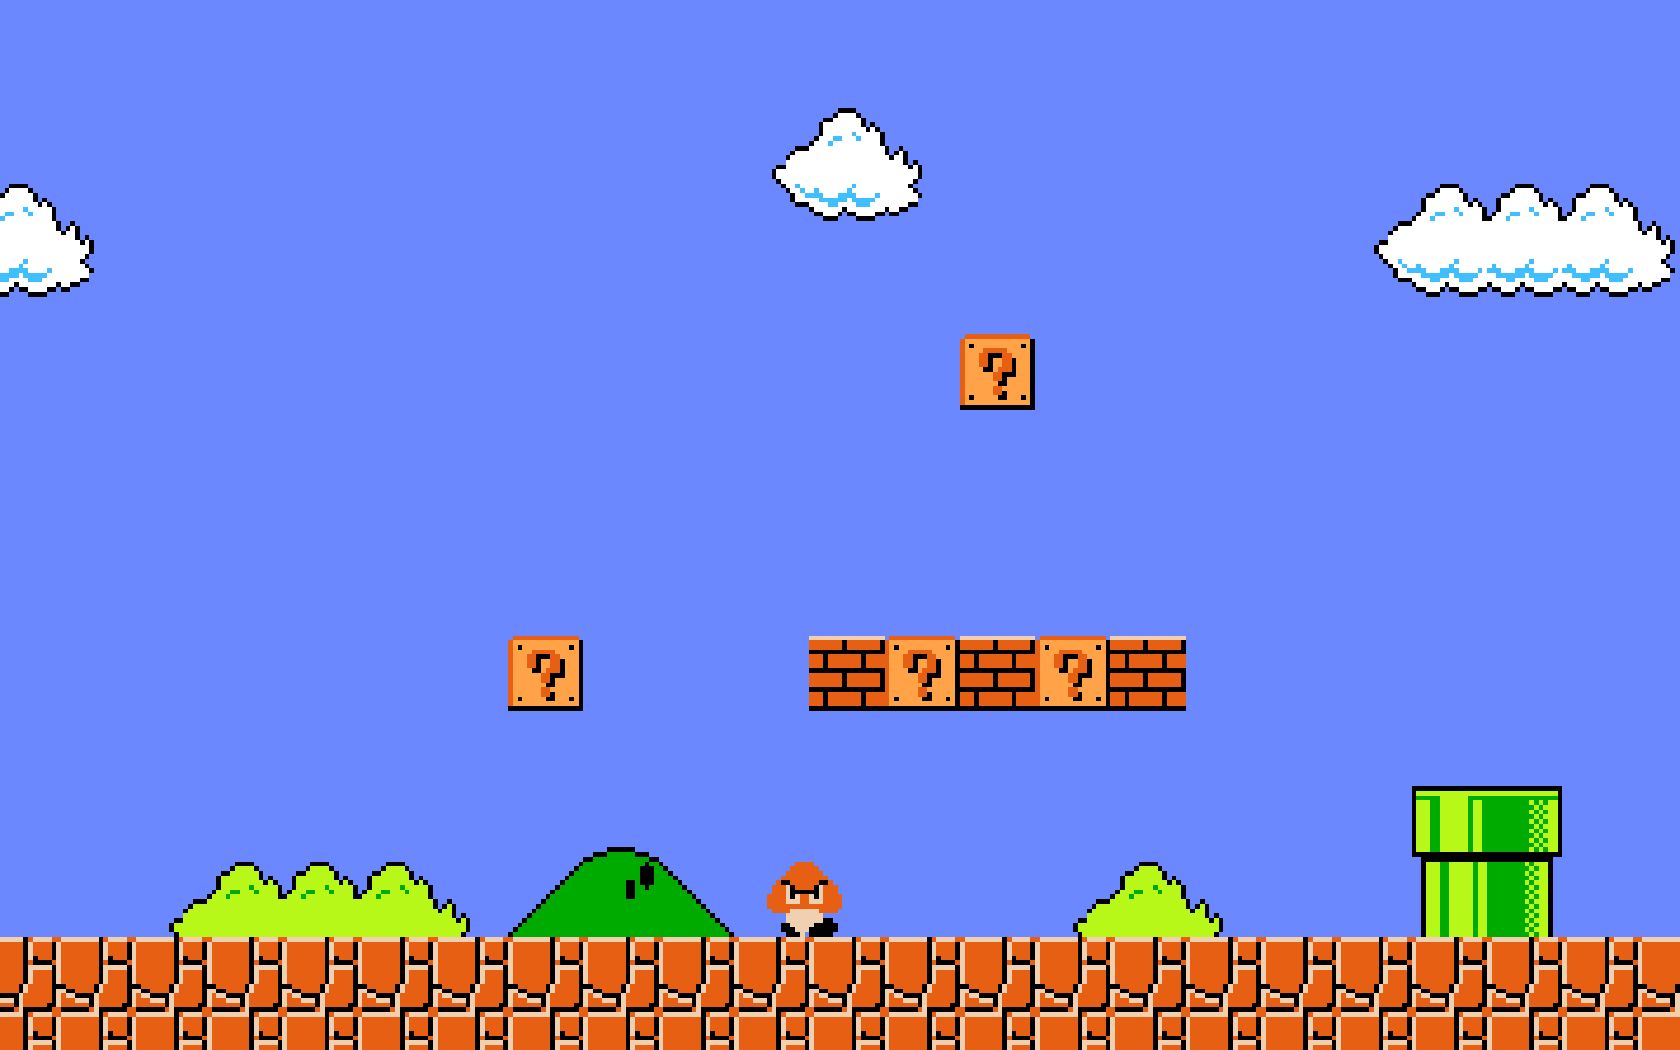 Gallery for - mario background game